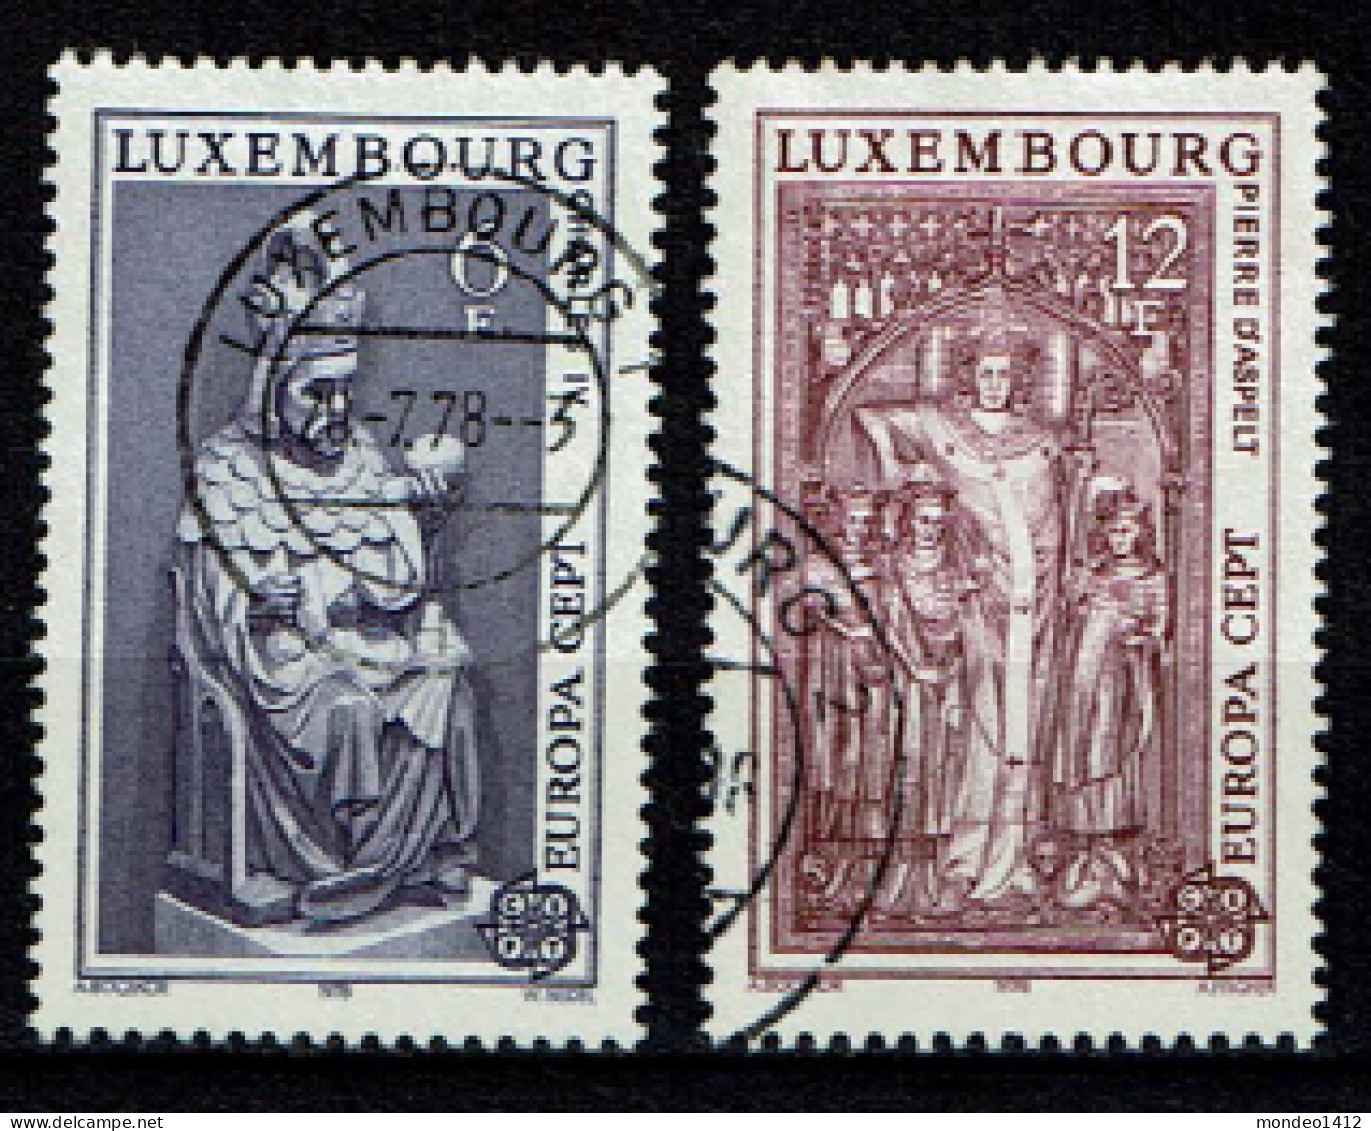 Luxembourg 1978 - YT 917/918 - EUROPA Stamps - Monuments - Used Stamps